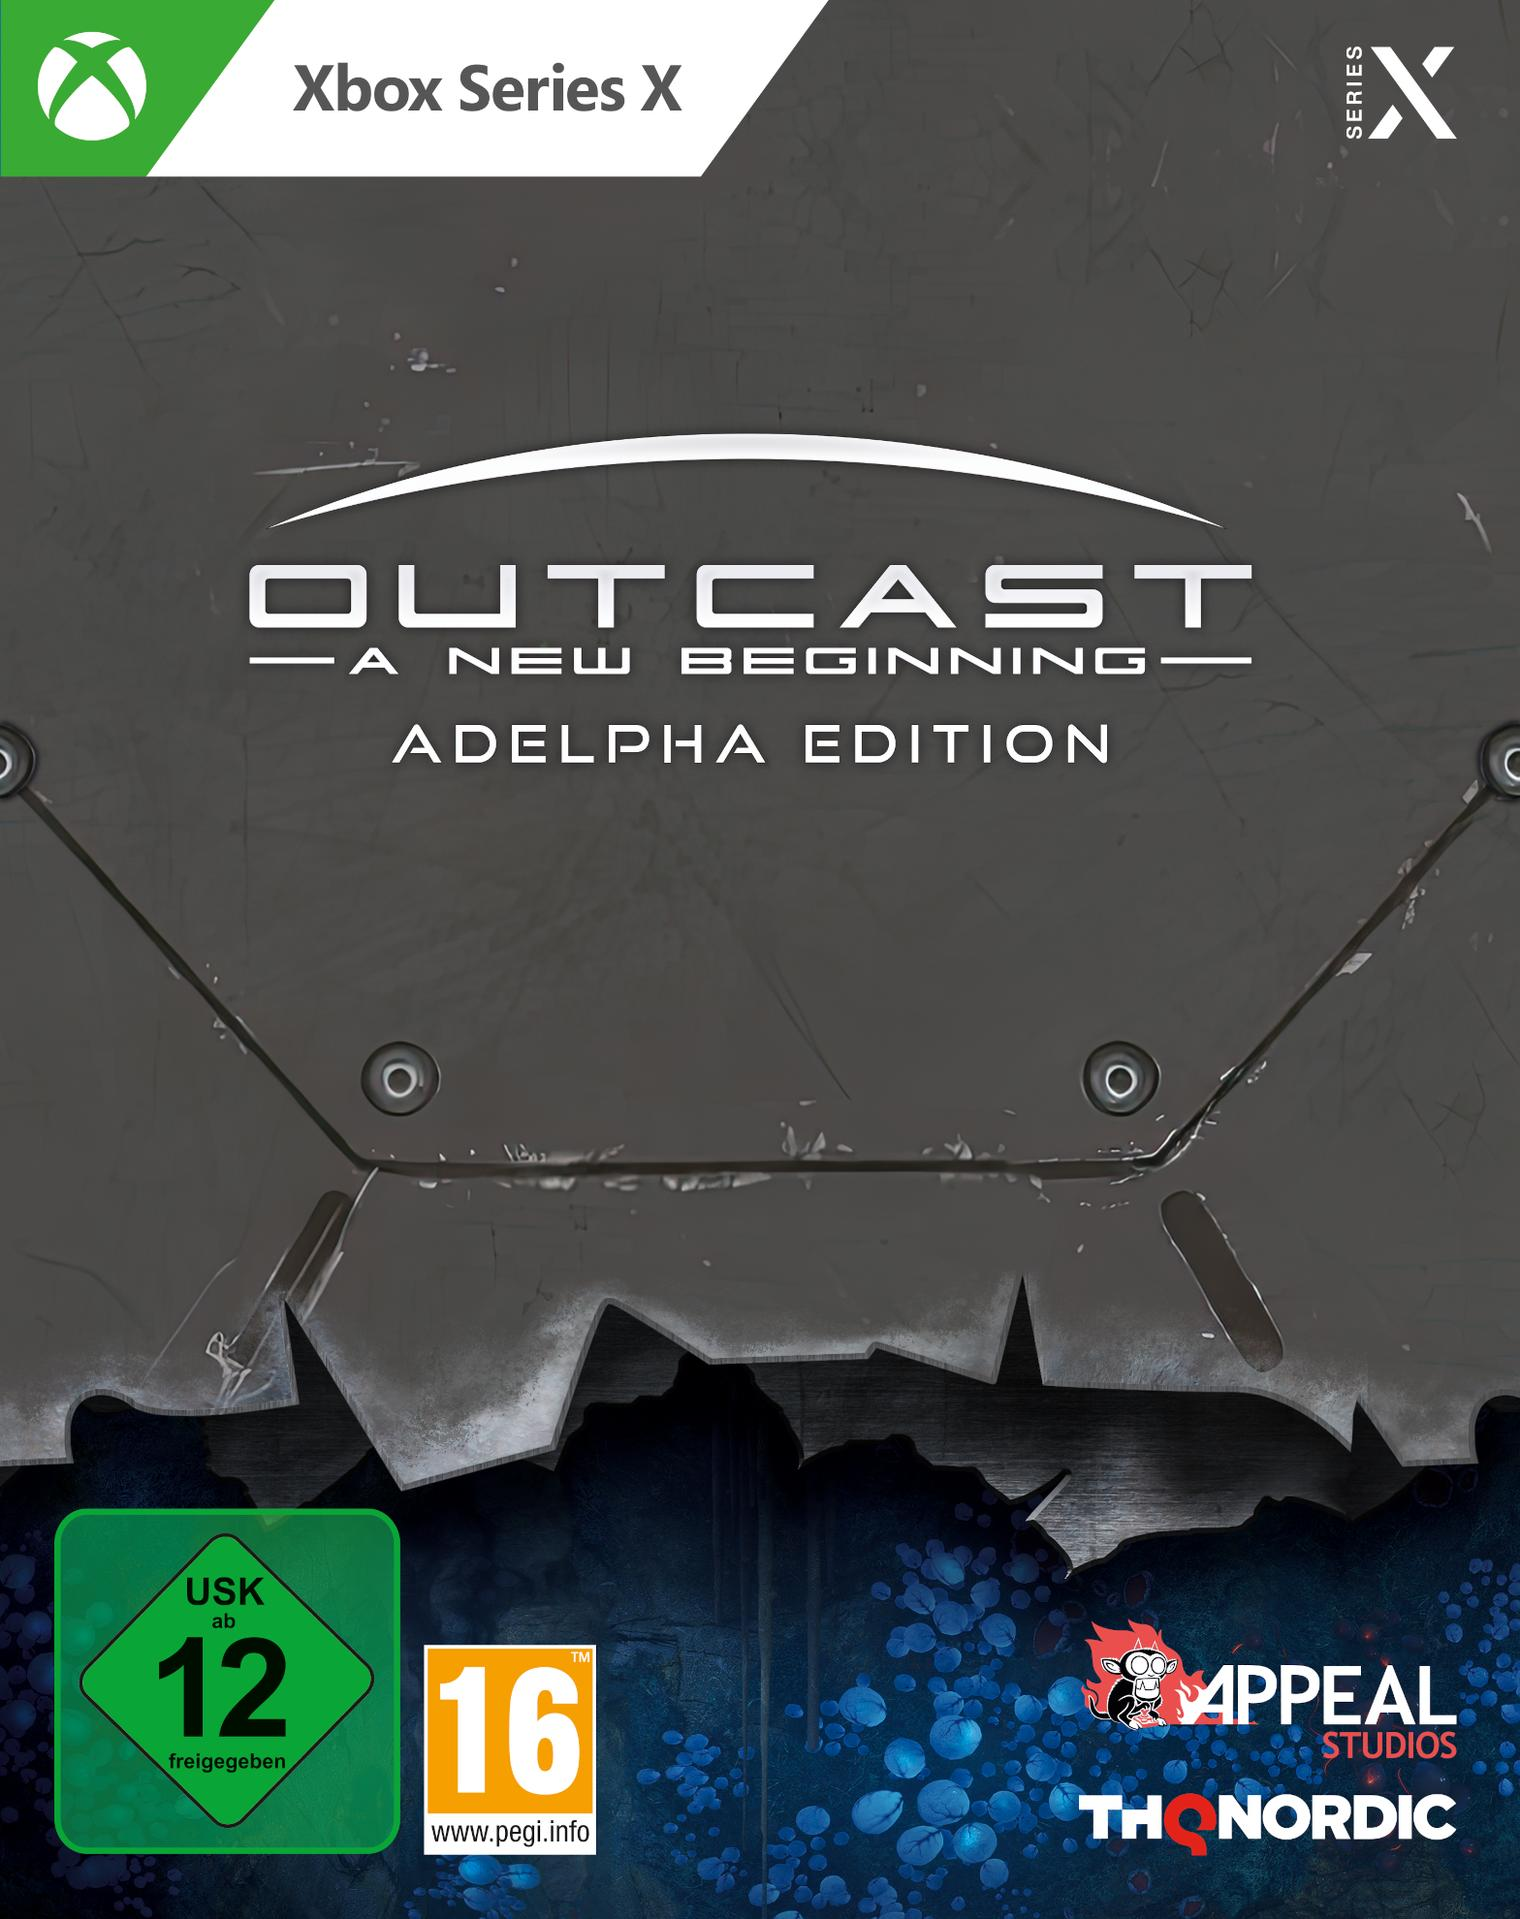 New Adelpha X] - - Edition A Outcast - Series Beginning [Xbox